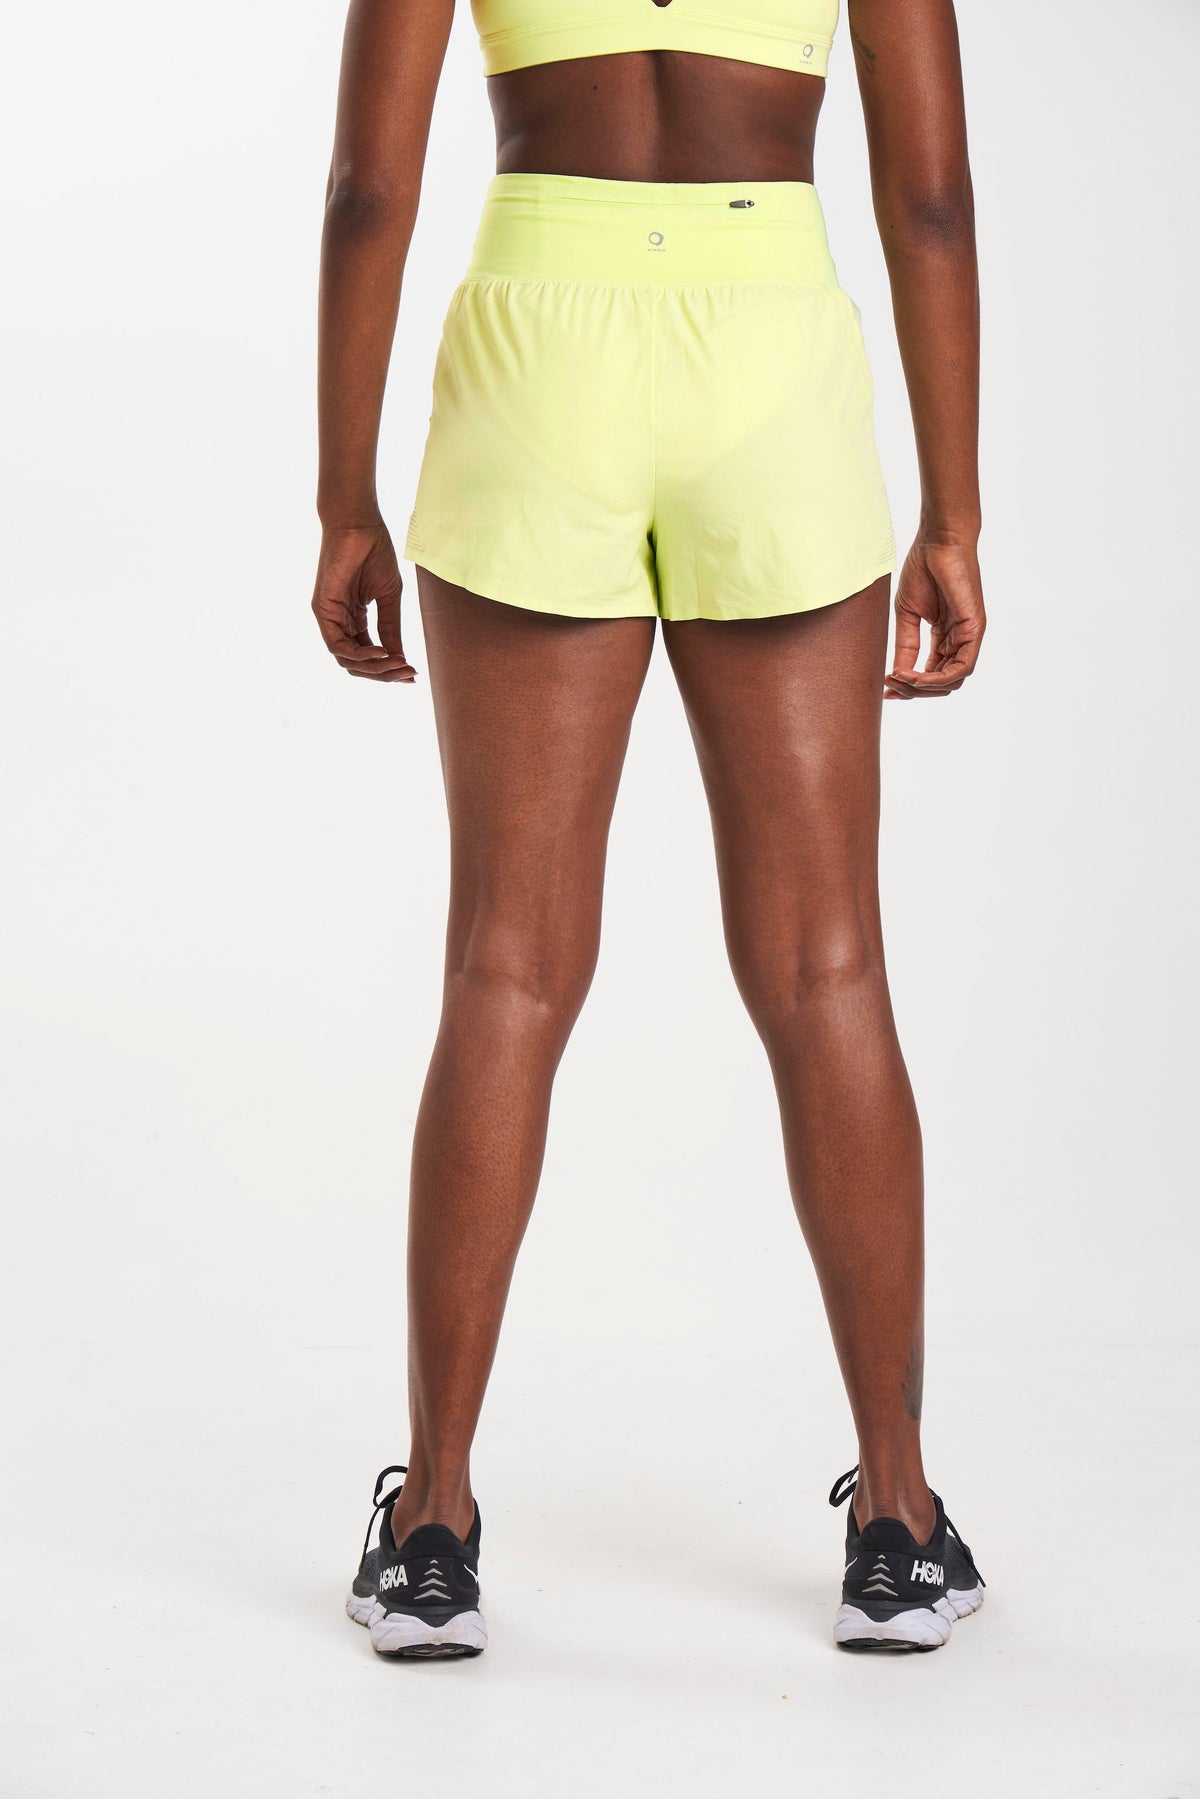 Back view of sustainable running shorts in color stem (yellow)